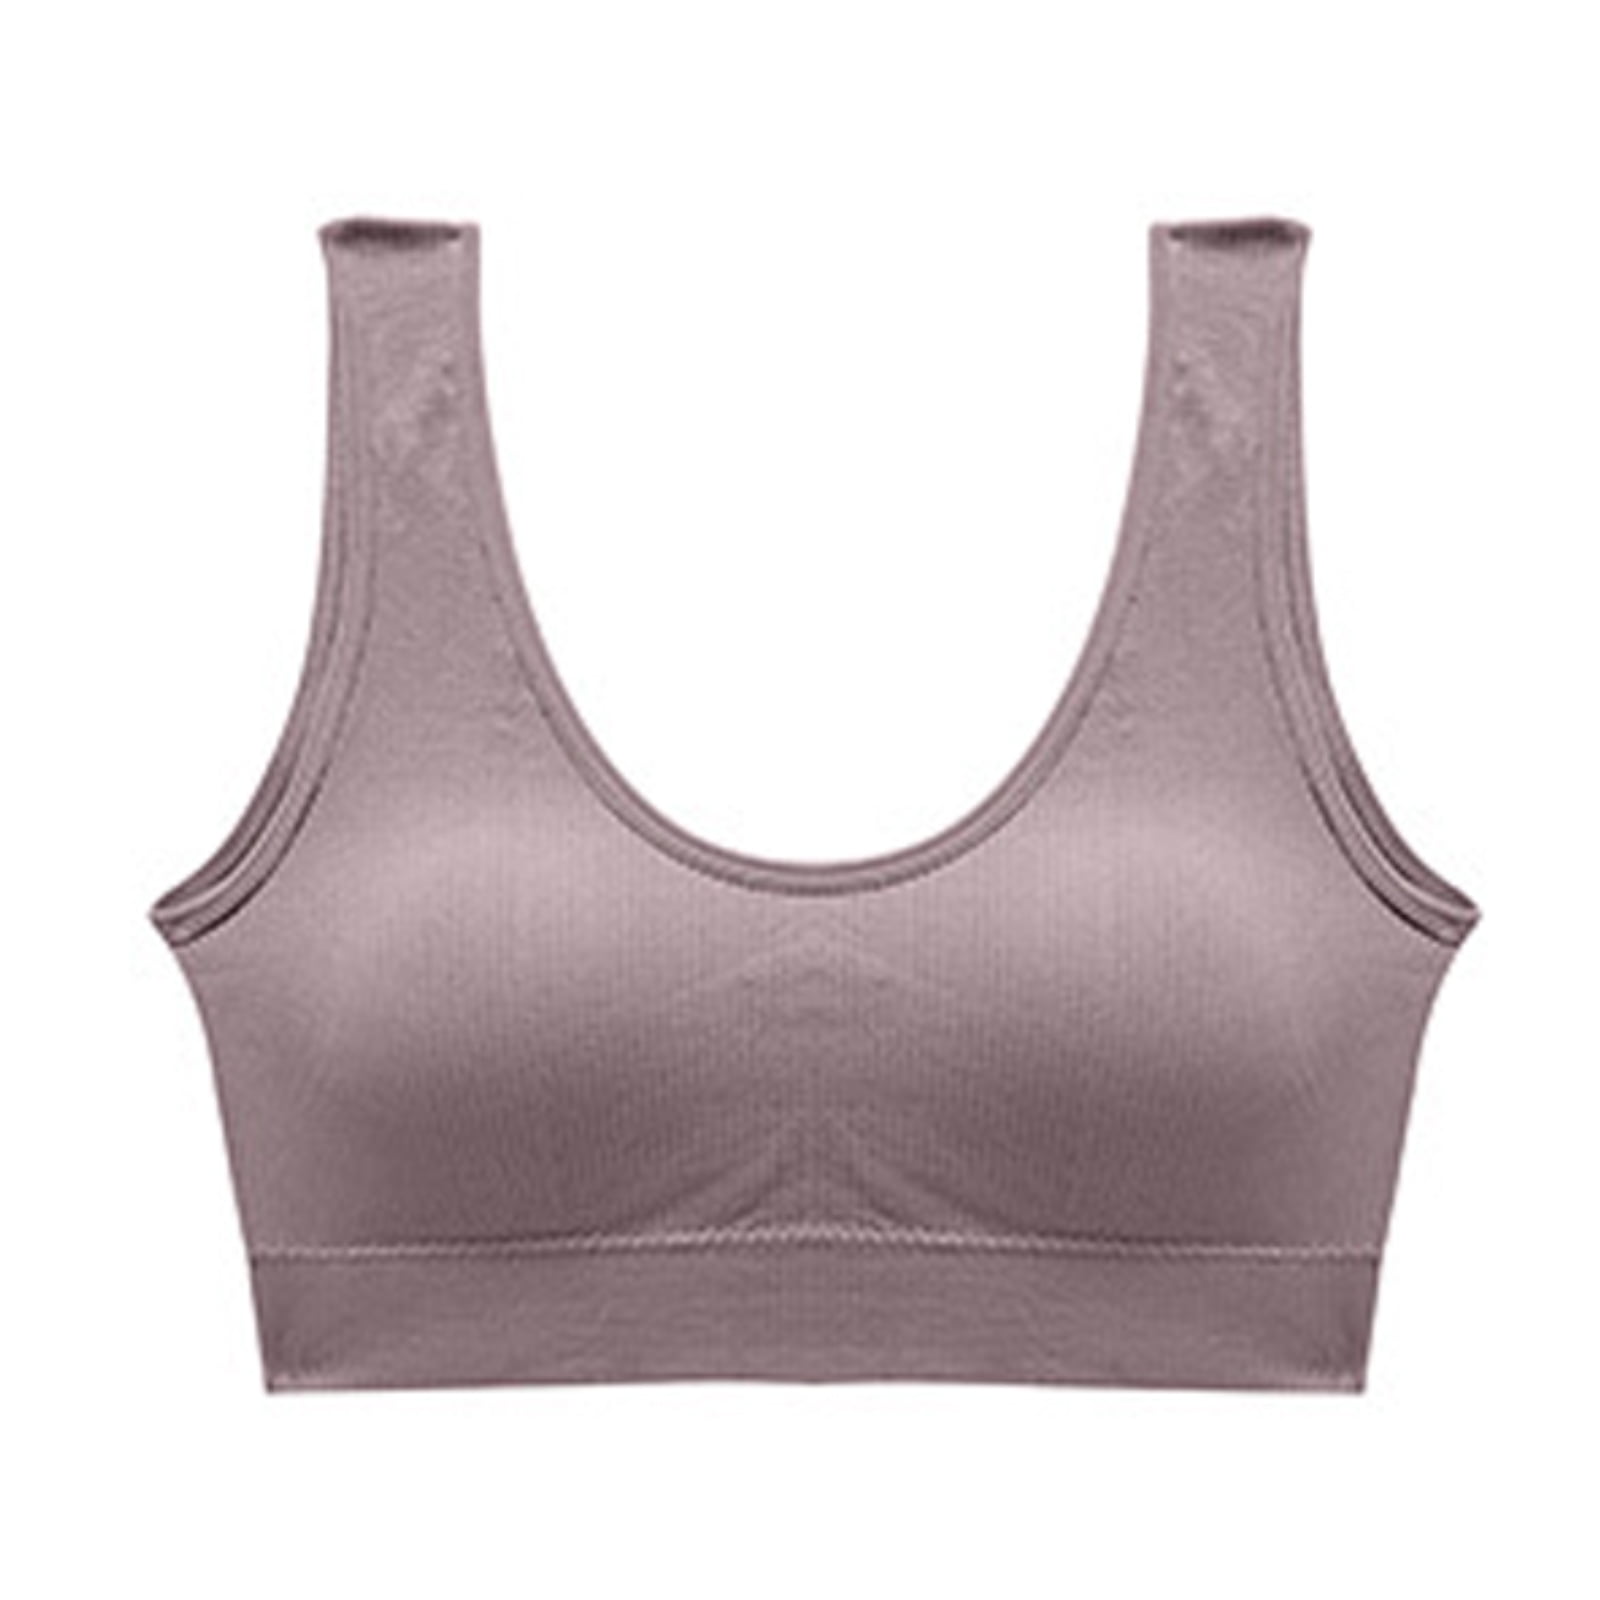 ayushicreationa Women's Everyday Cotton Padded Sports Bra for Gym, Running,  Workout Full Support, Removable Pads, Wirefree, Full Coverage, 1pc, Grey.